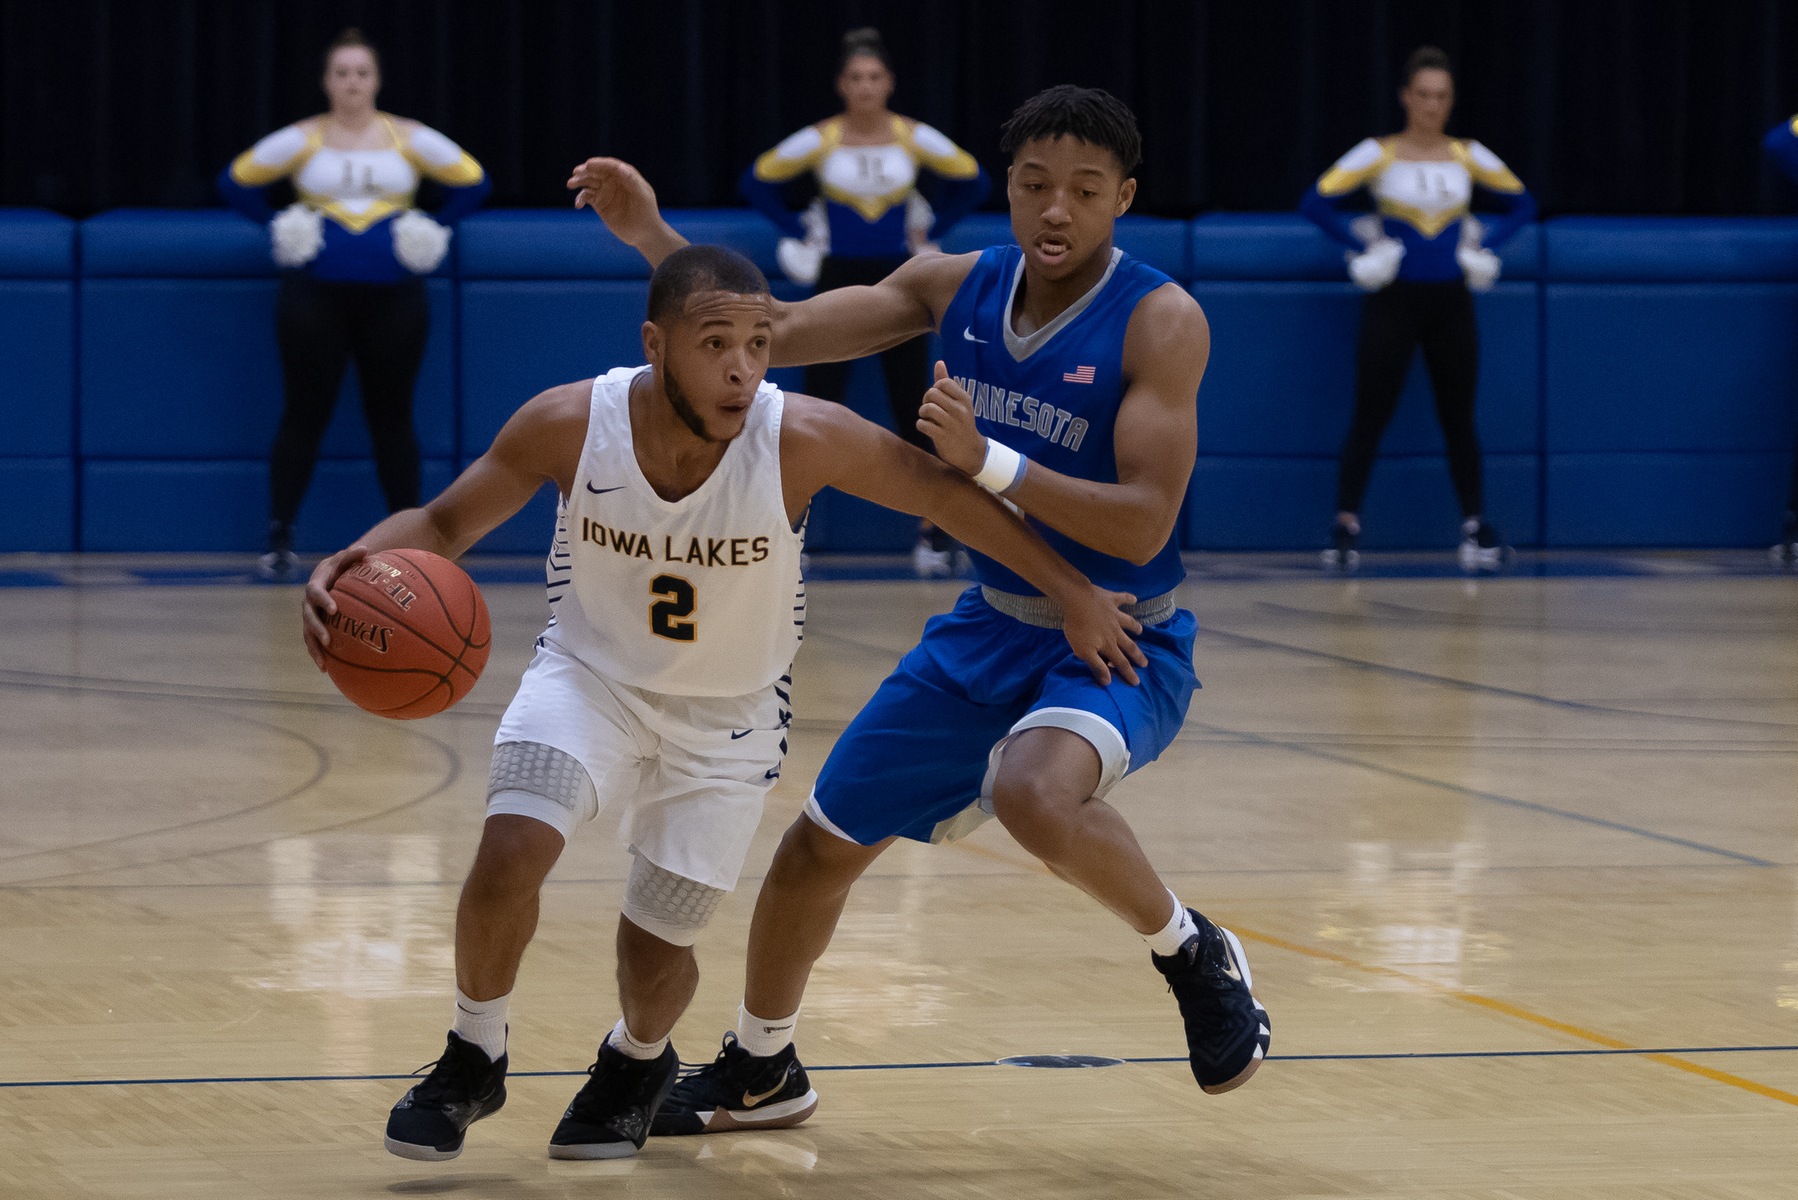 Lakers fall to NIACC